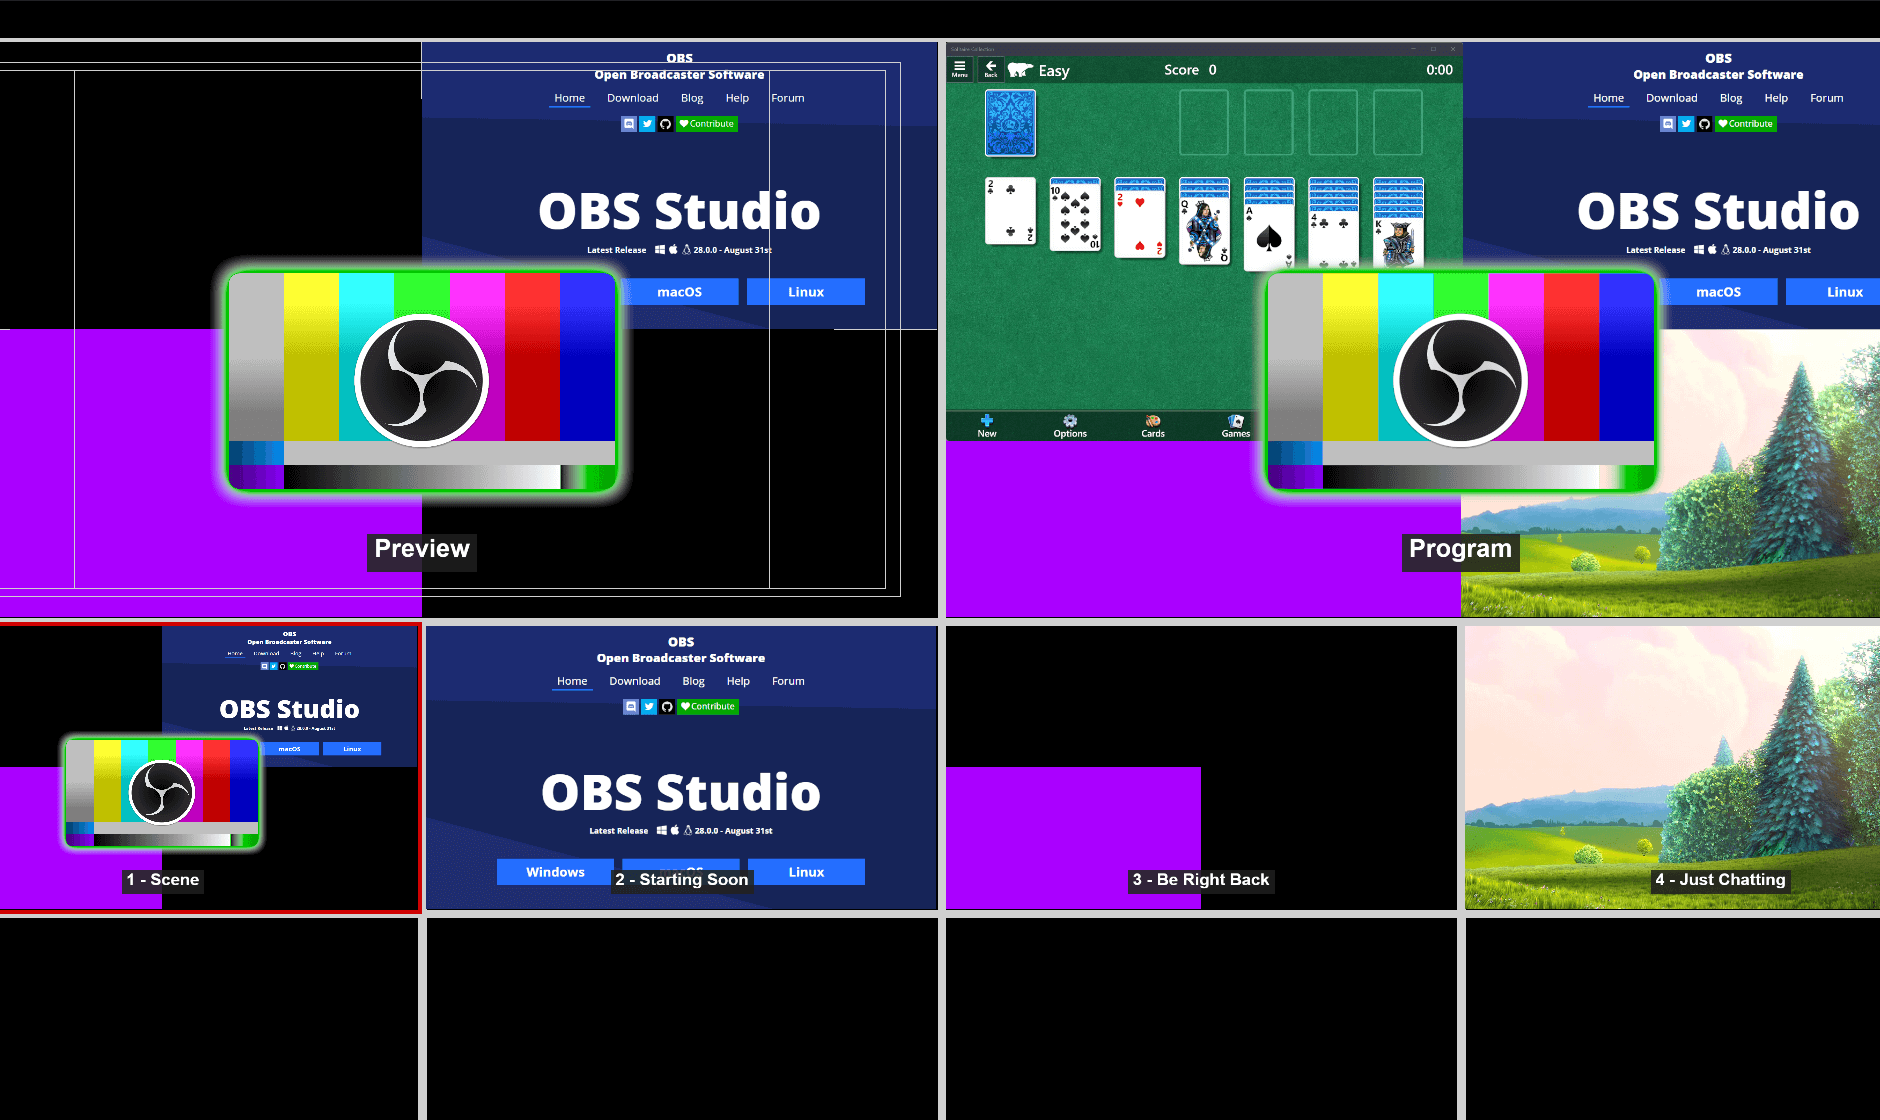 Open Broadcaster Software | OBS